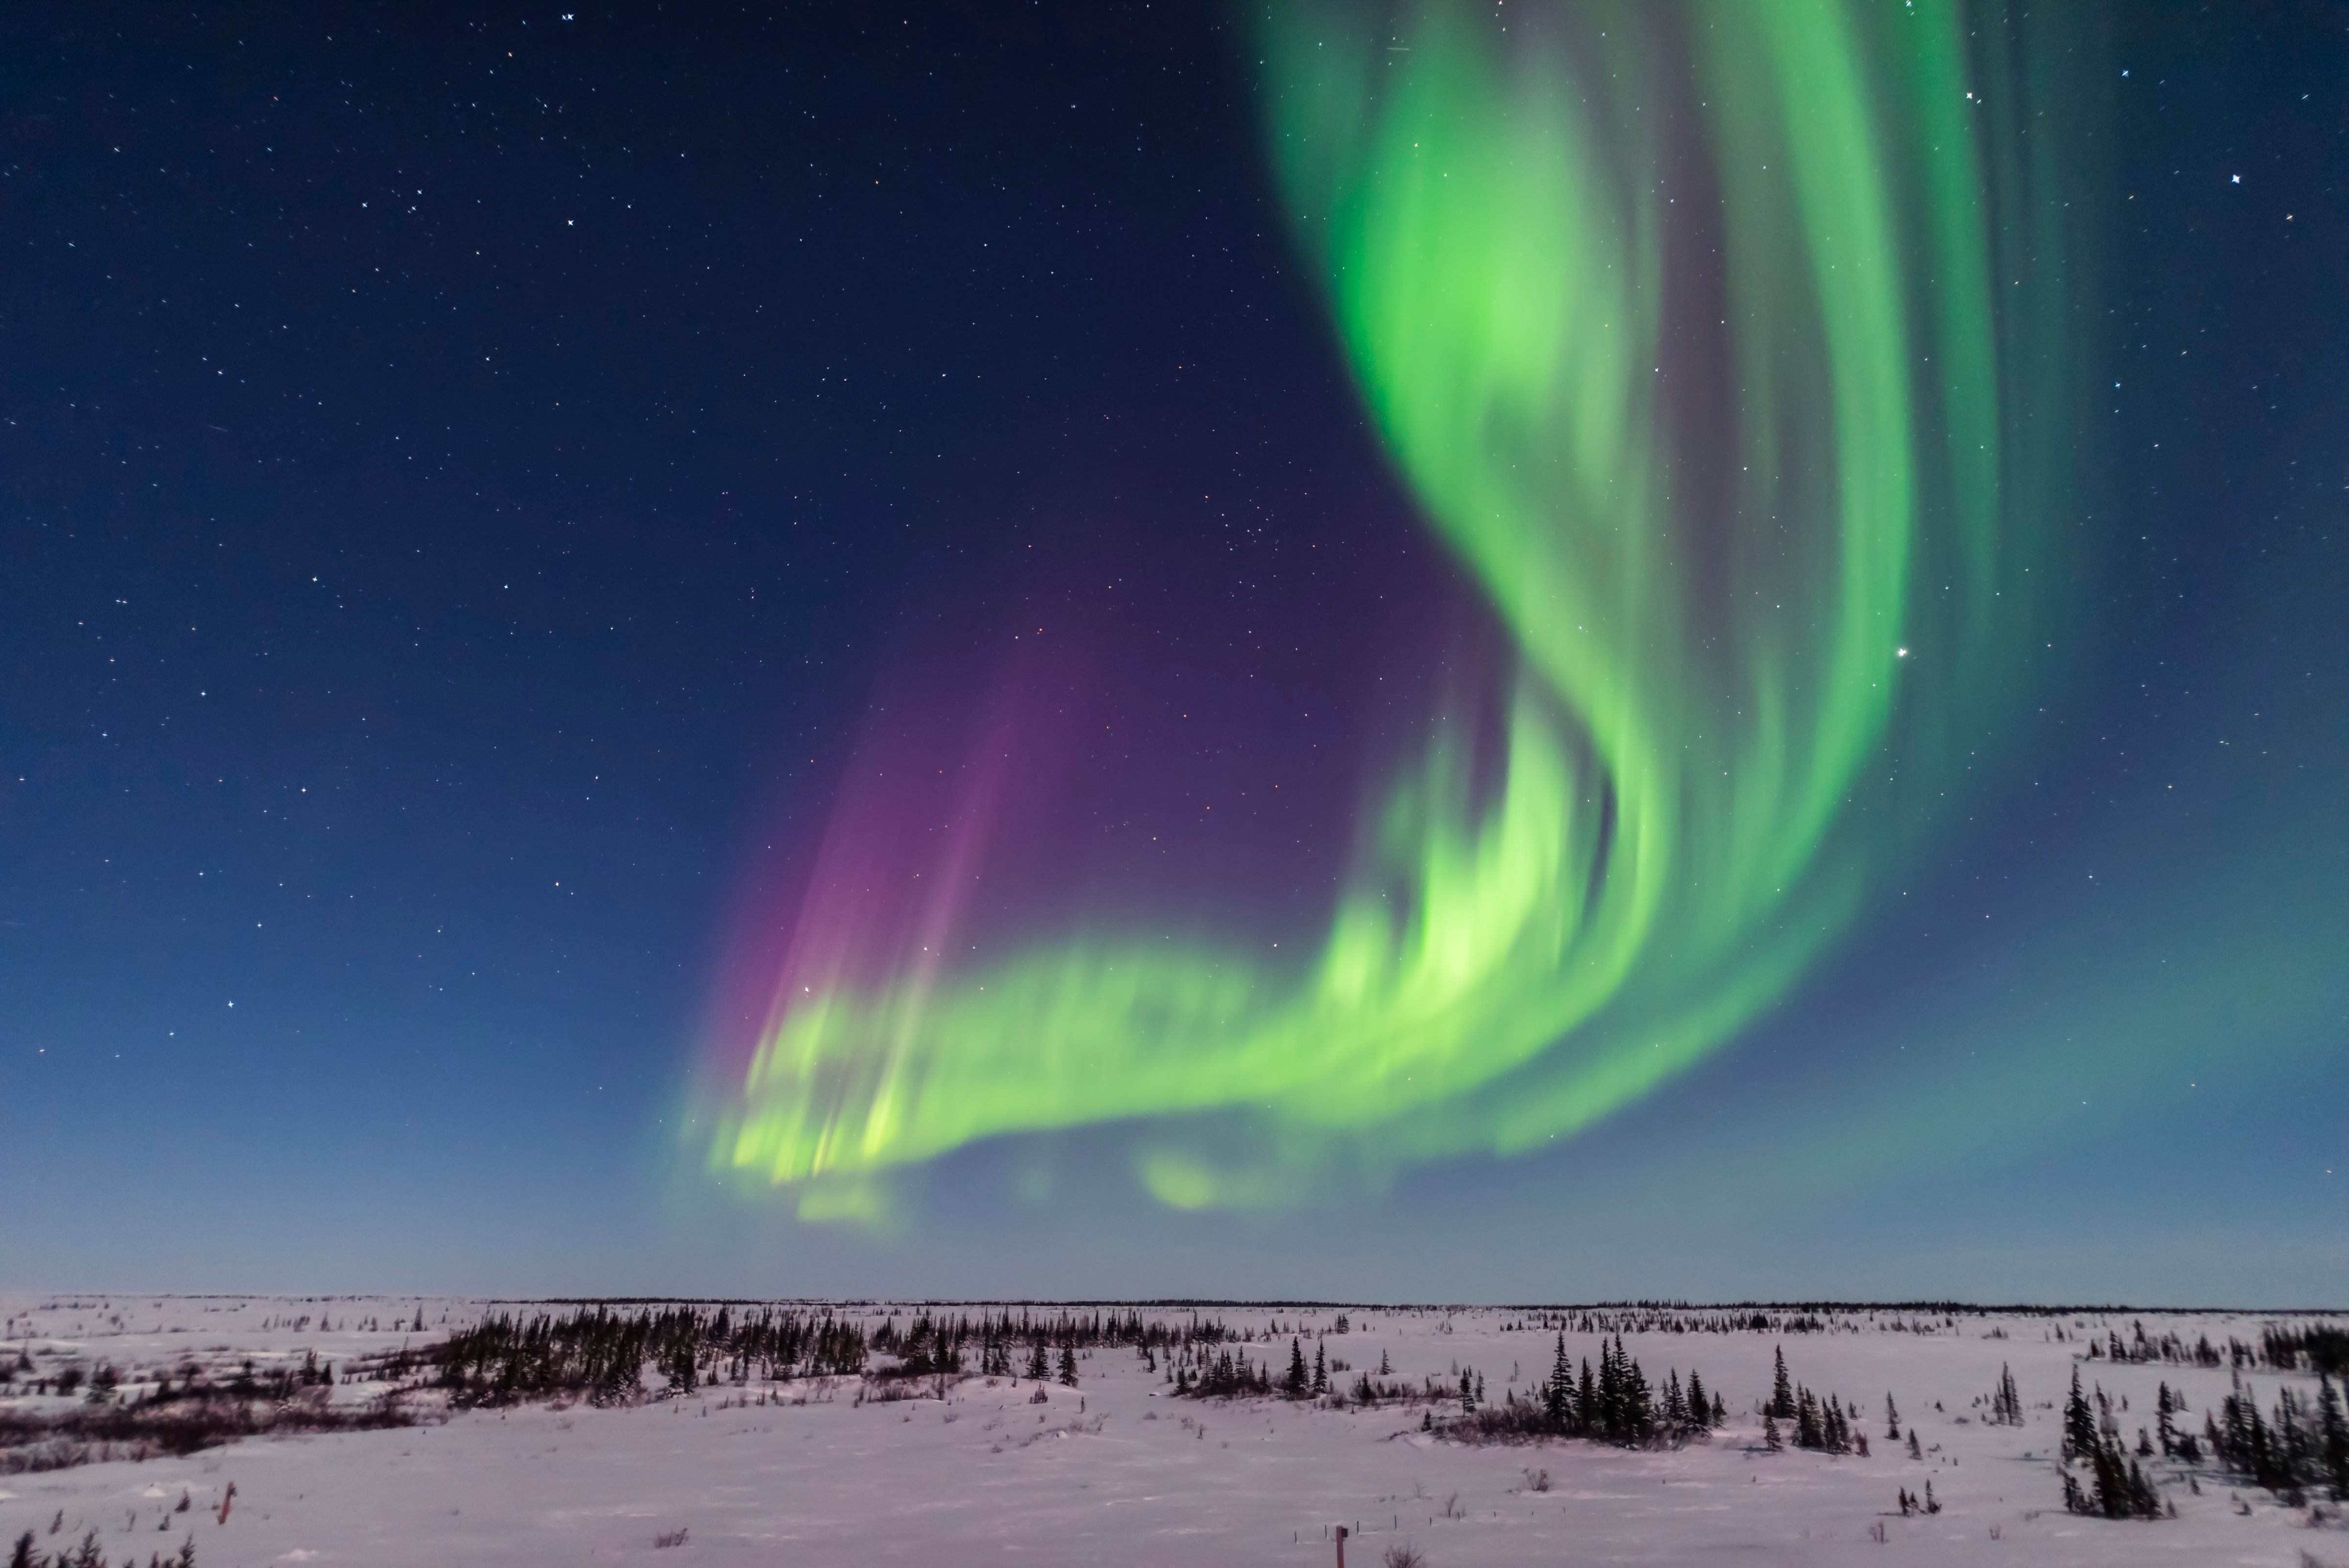 A superb display of aurora borealis seen on March 14